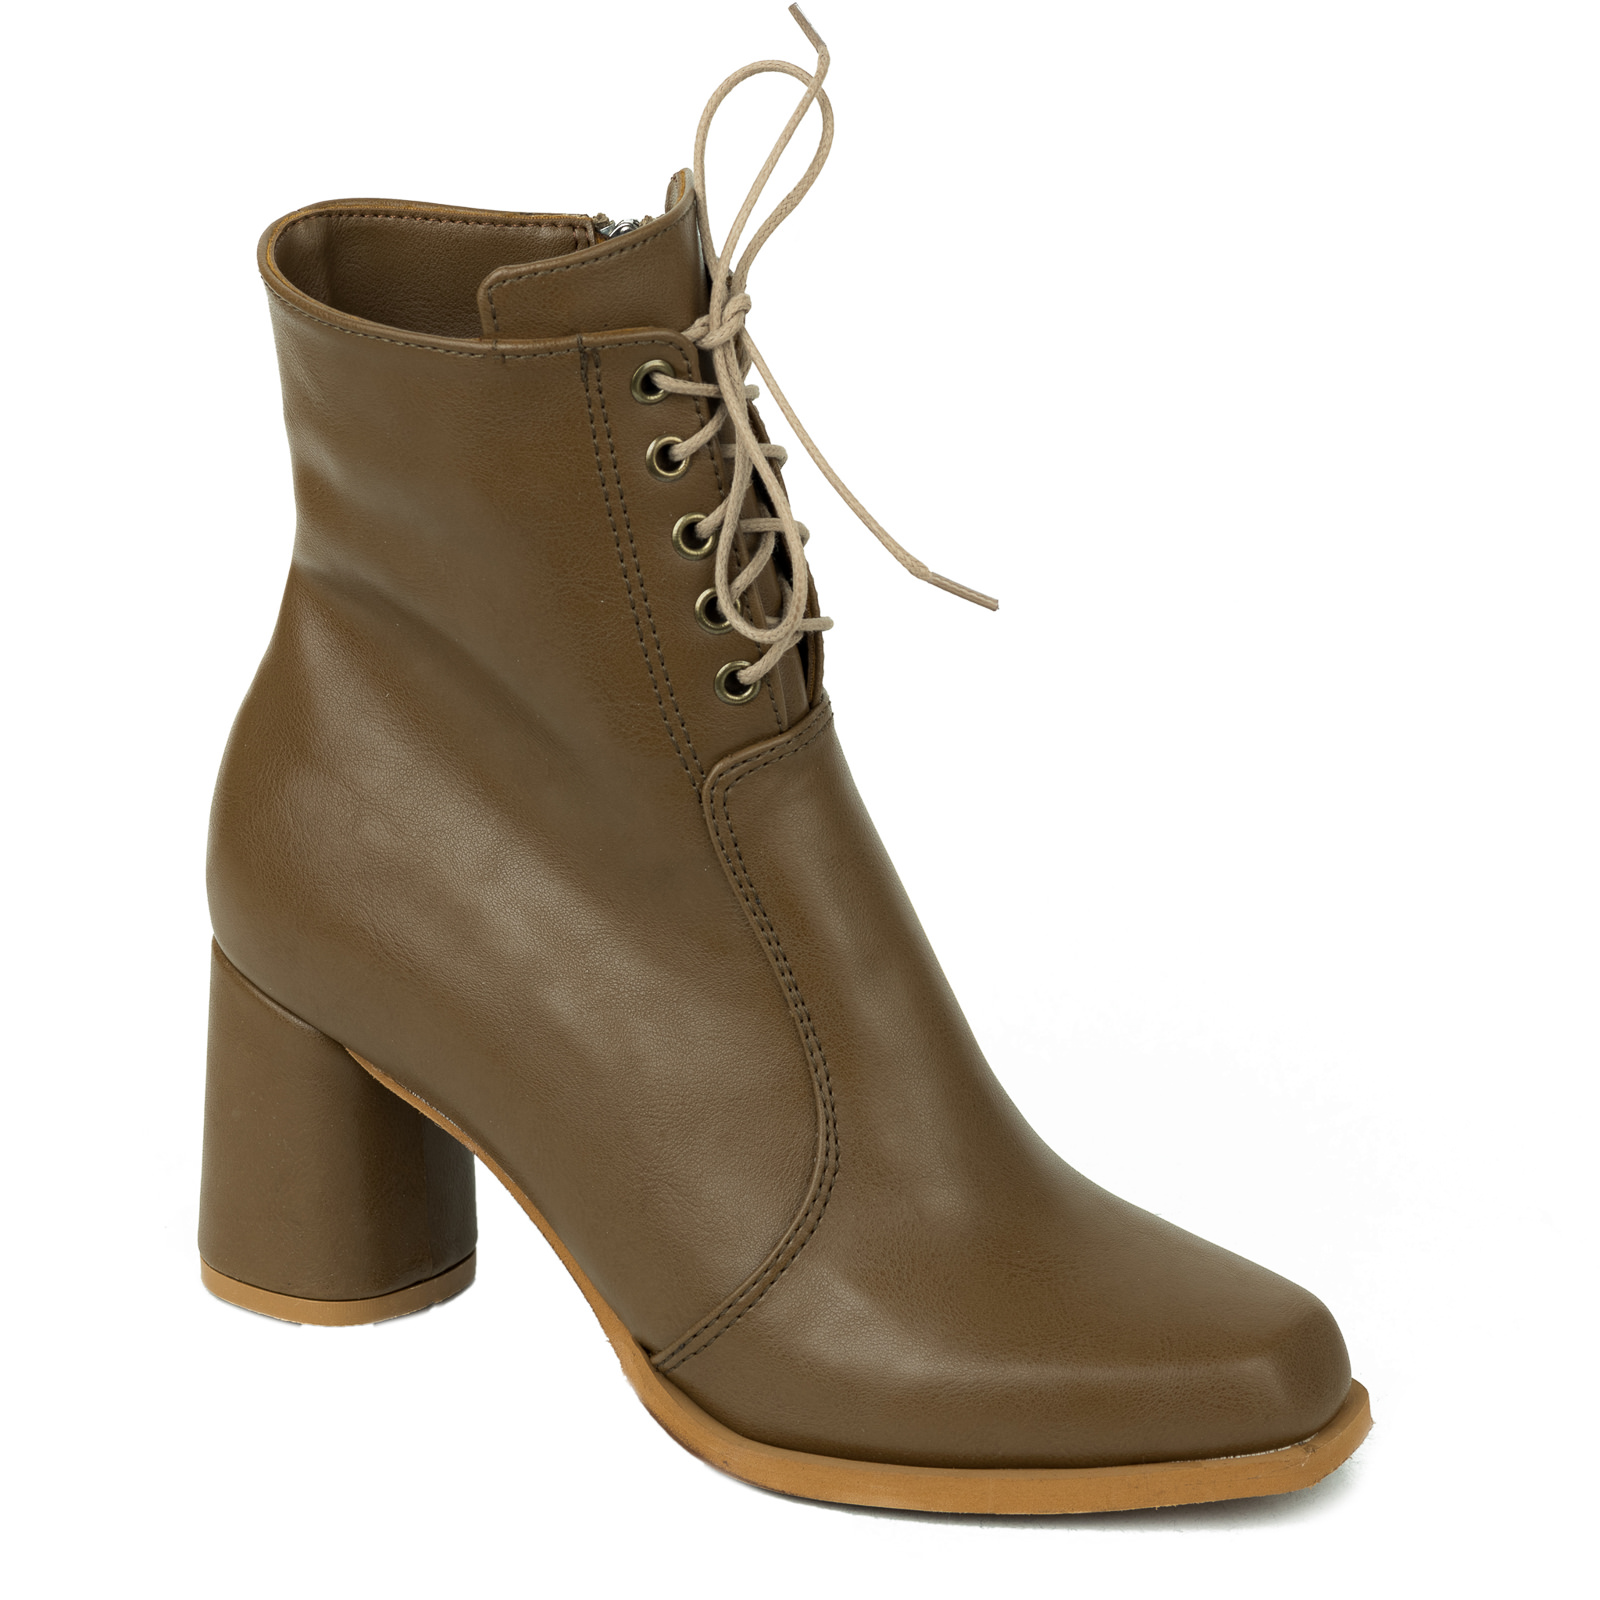 Women ankle boots B359 - BROWN